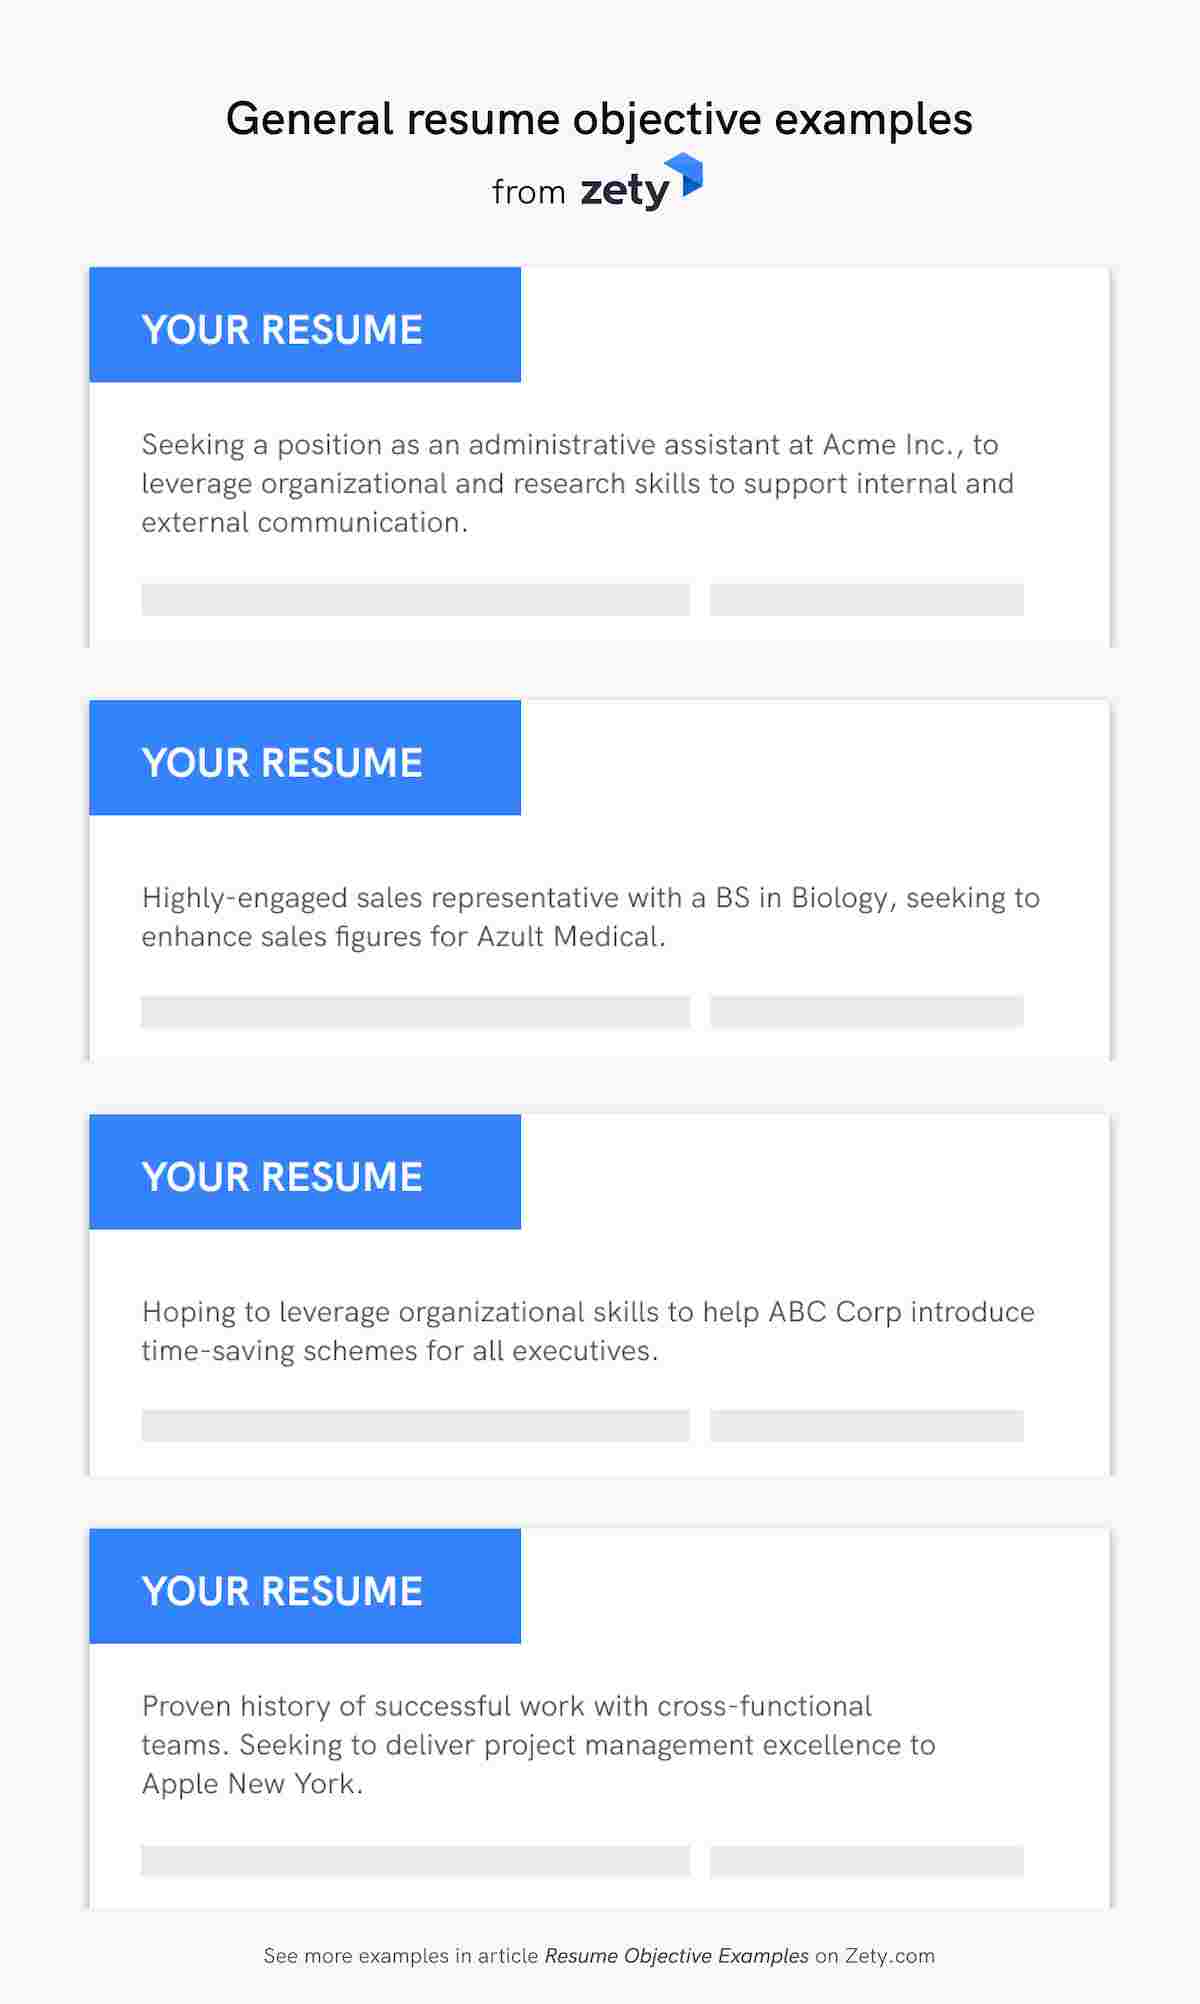 30+ Resume Objective Examples: Career Objectives for All Jobs